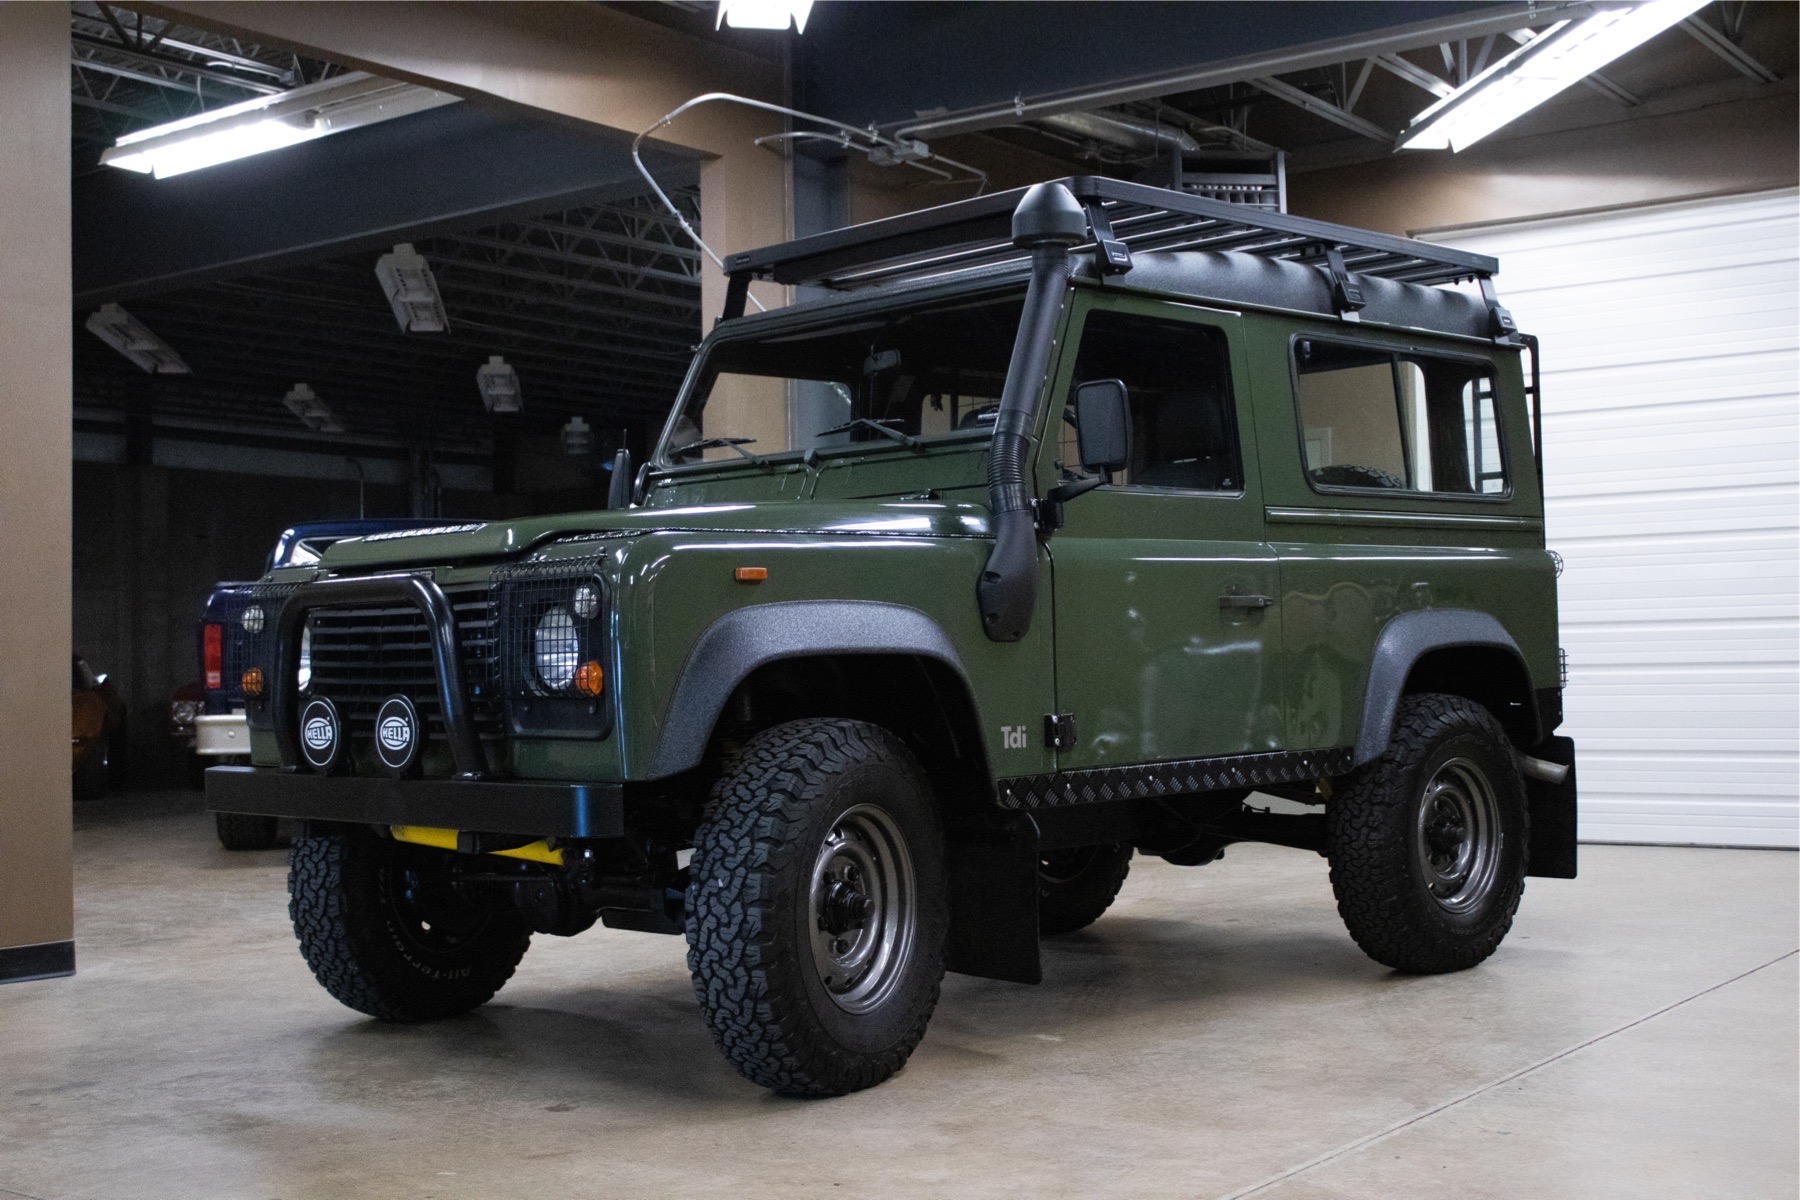 Trek fout Tot ziens Projects | 1992 Land Rover Defender 90 | Defender Imports